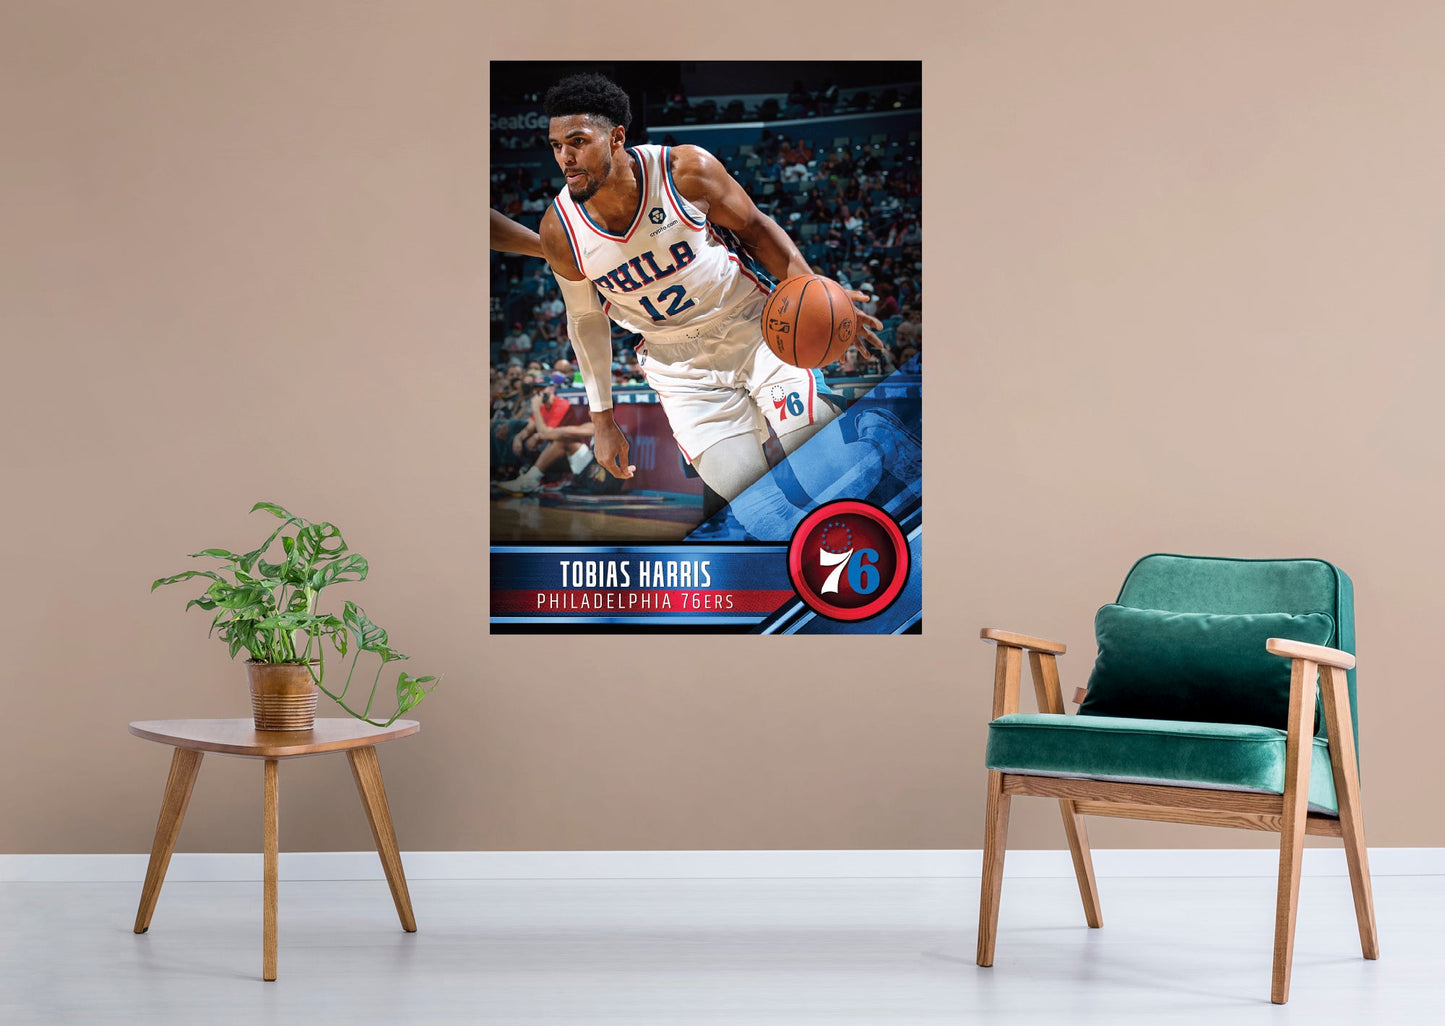 Philadelphia 76ers: Tobias Harris Poster - Officially Licensed NBA Removable Adhesive Decal